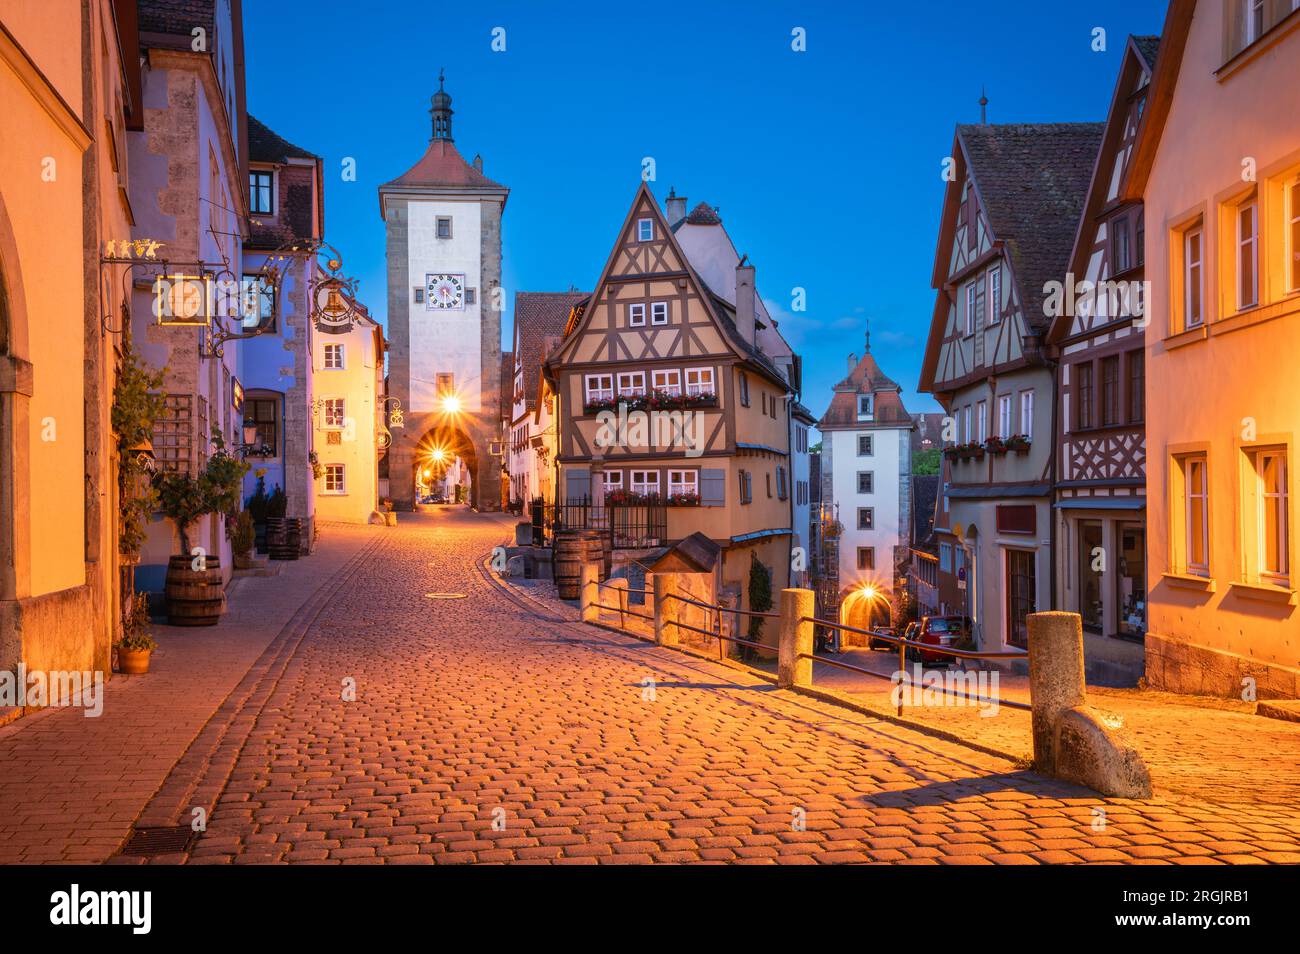 Dusk's Charm - Strolling Through the Beauty of a Medieval Old Town of Rothenburg ob der Tauber, Germany Stock Photo